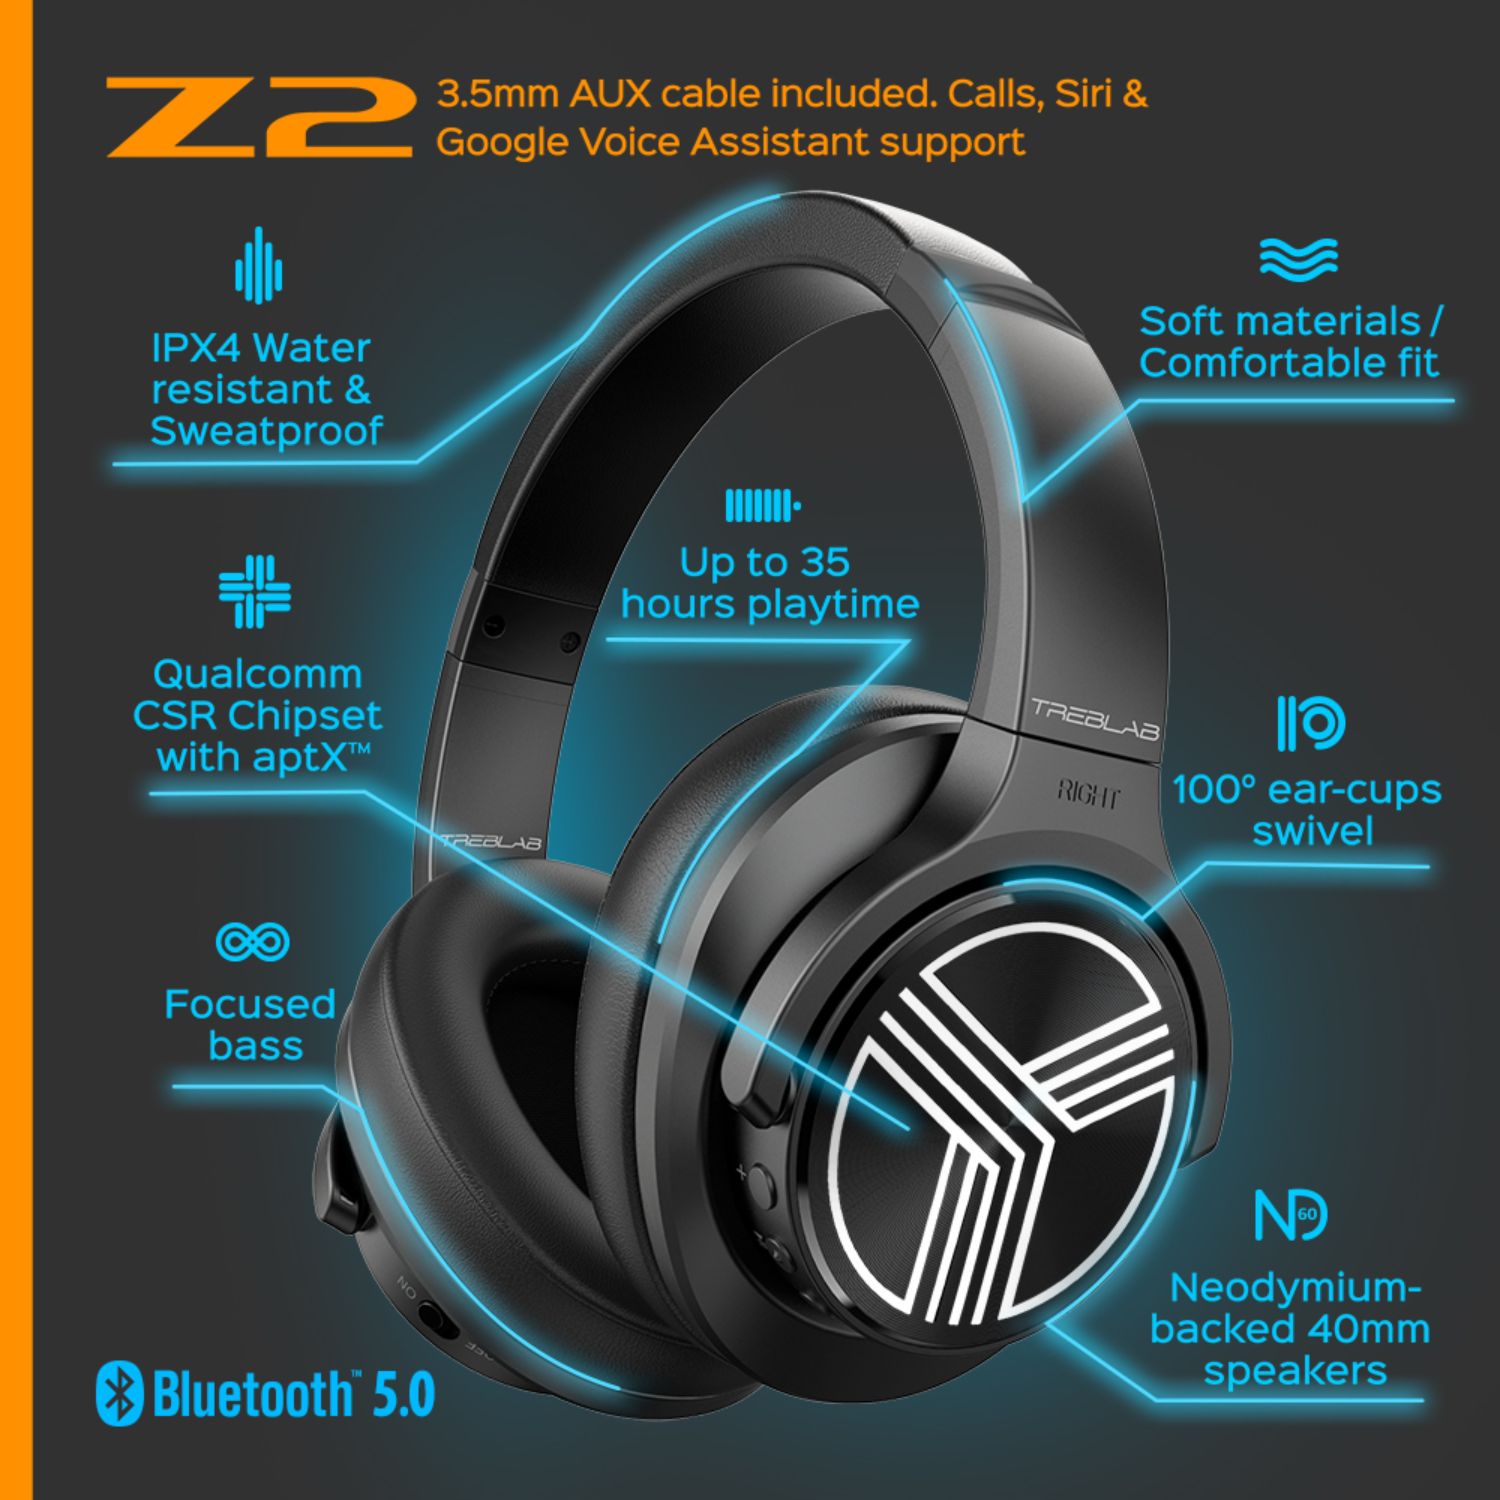 TREBLAB Z2 | Over Ear Workout Headphones with Microphone | Bluetooth 5.0, Active Noise Cancelling (ANC) | Up to 35H Battery...